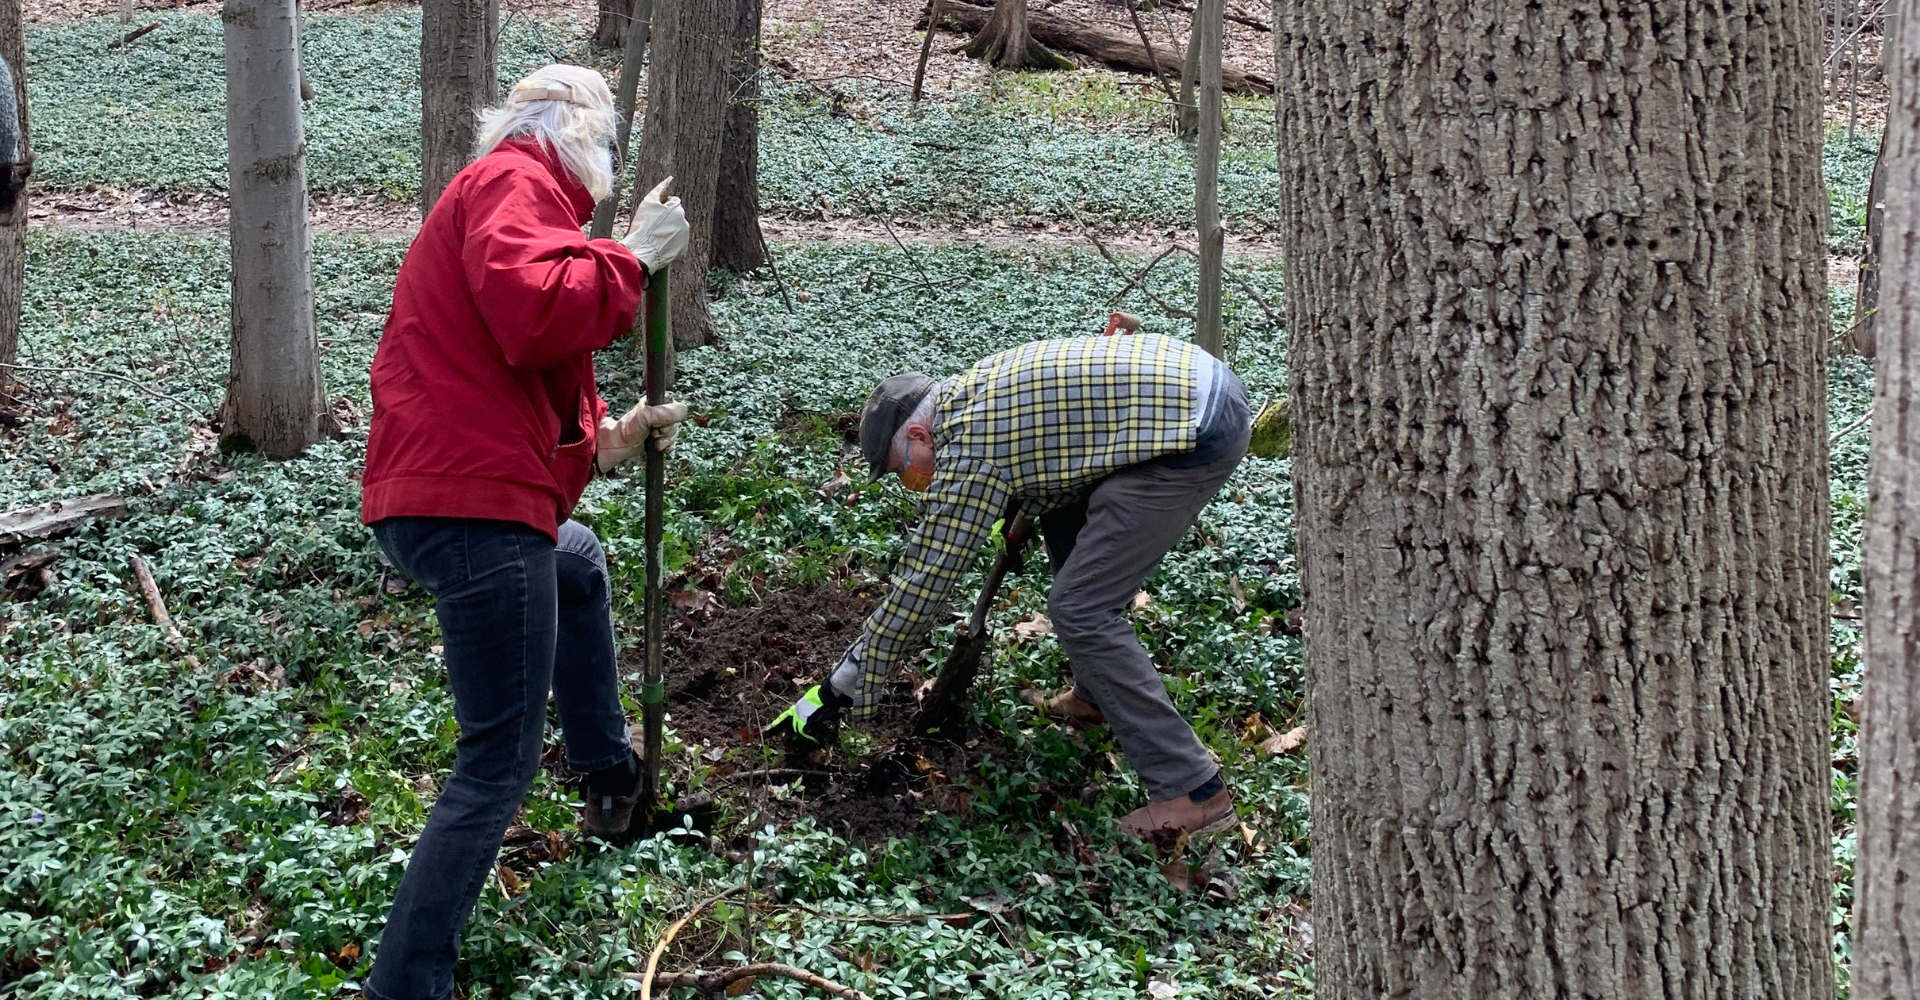 Making a clearing for periwinkle to grow